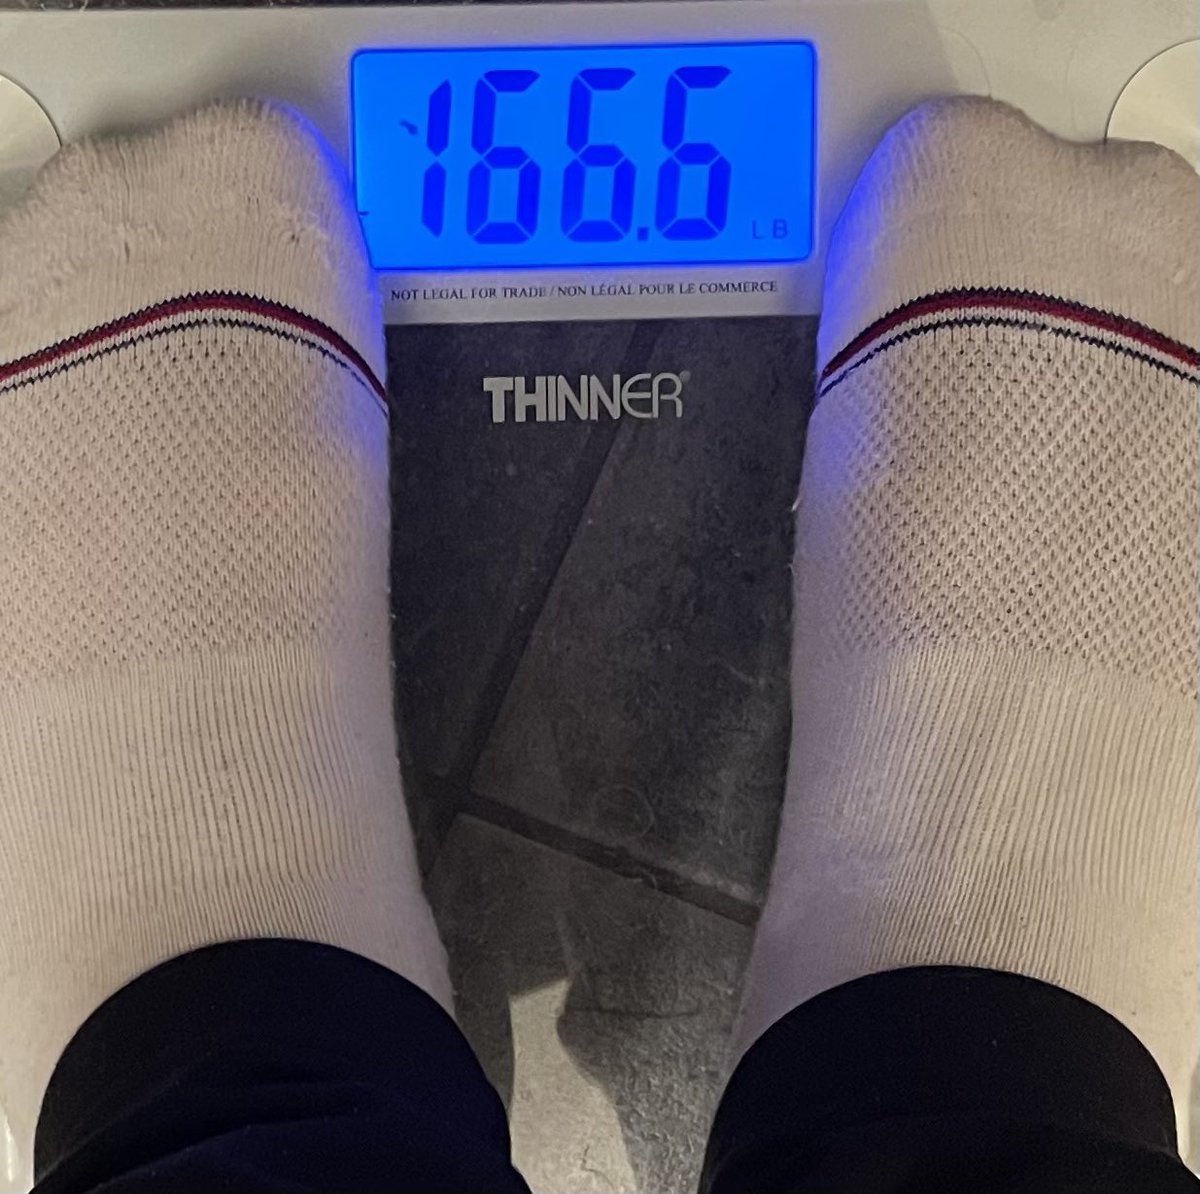 This won’t mean much to many. But after my stomach #cancer surgery in 2020, I lost 125lbs over seven months and bottomed out at scary 138lbs. So I made it my goal to recover to 165. It’s taken three years and today… FINALLY… got there! 😃#fullspeedahead